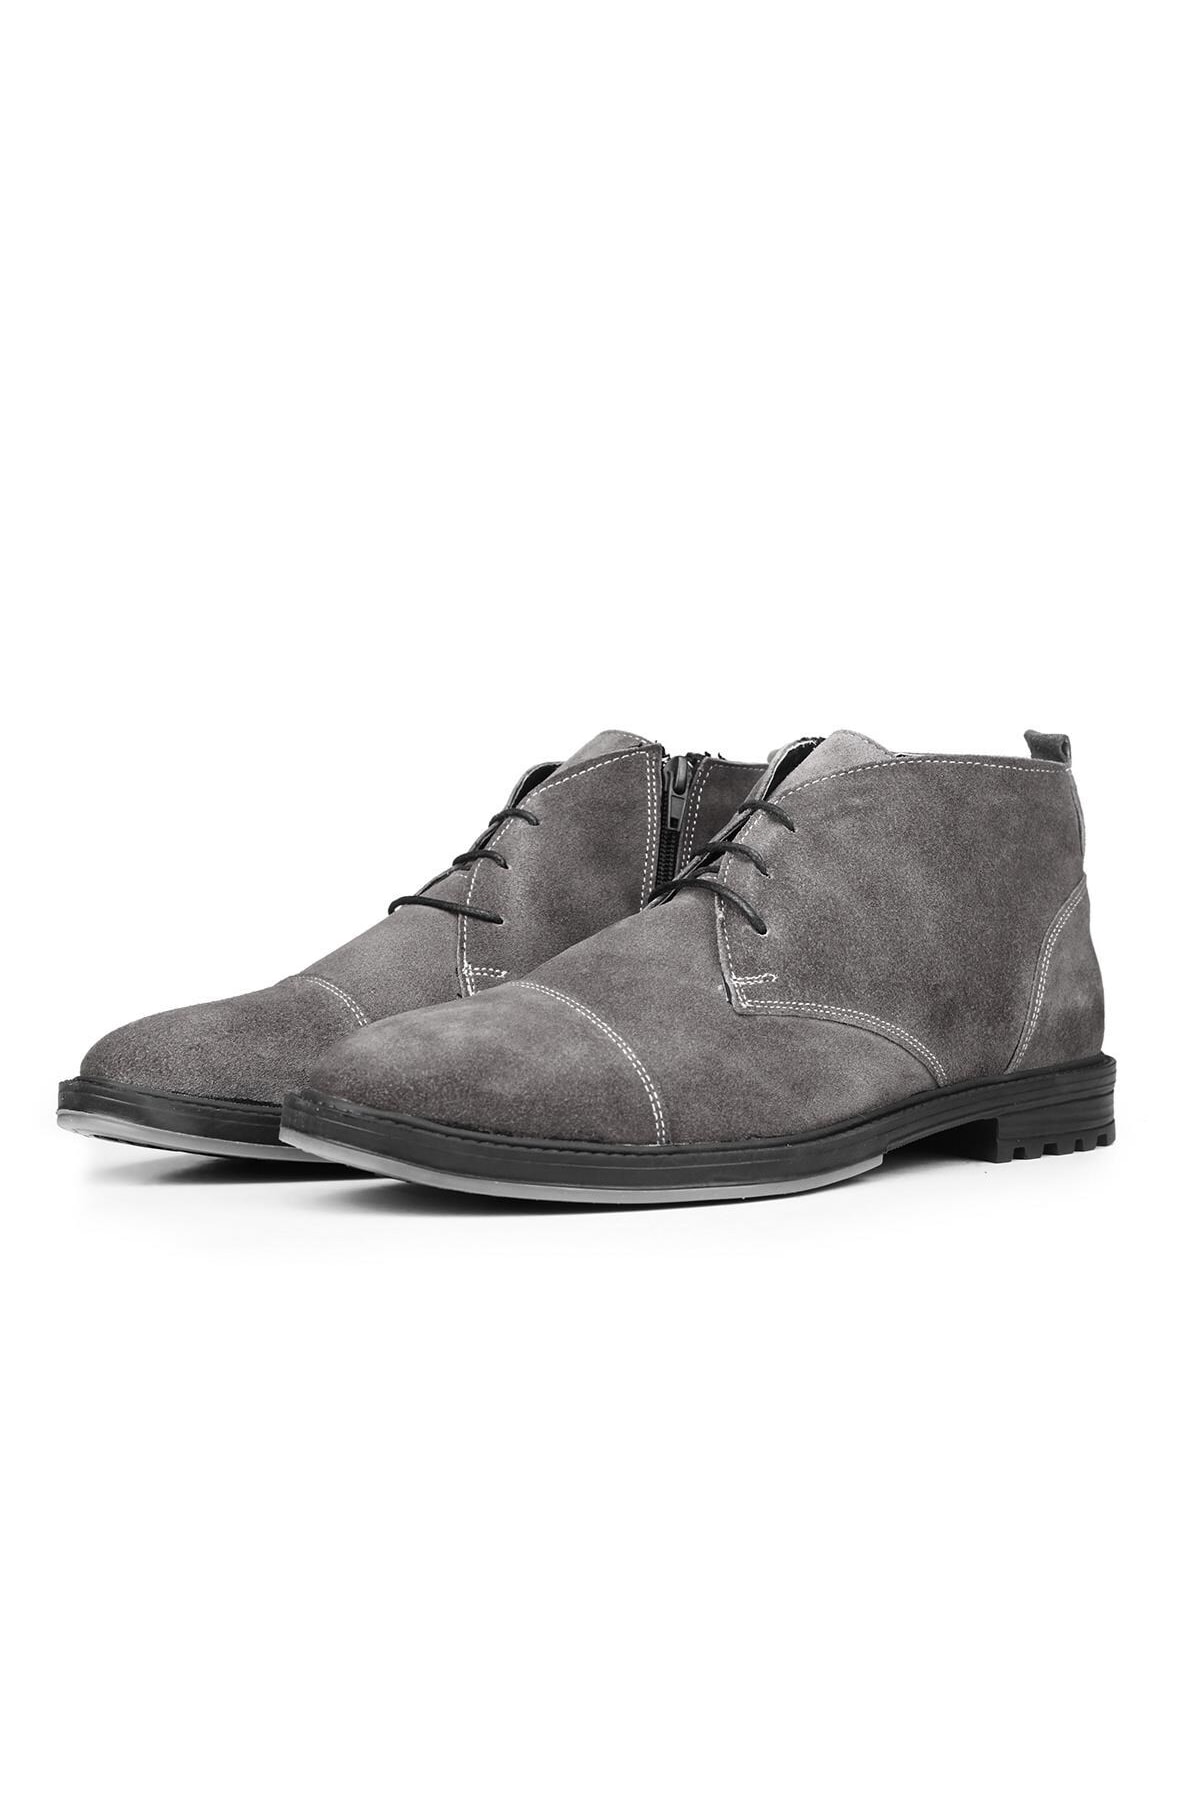 Levně Ducavelli Masquerade Genuine Leather Anti-Slip Sole Daily Boots Gray